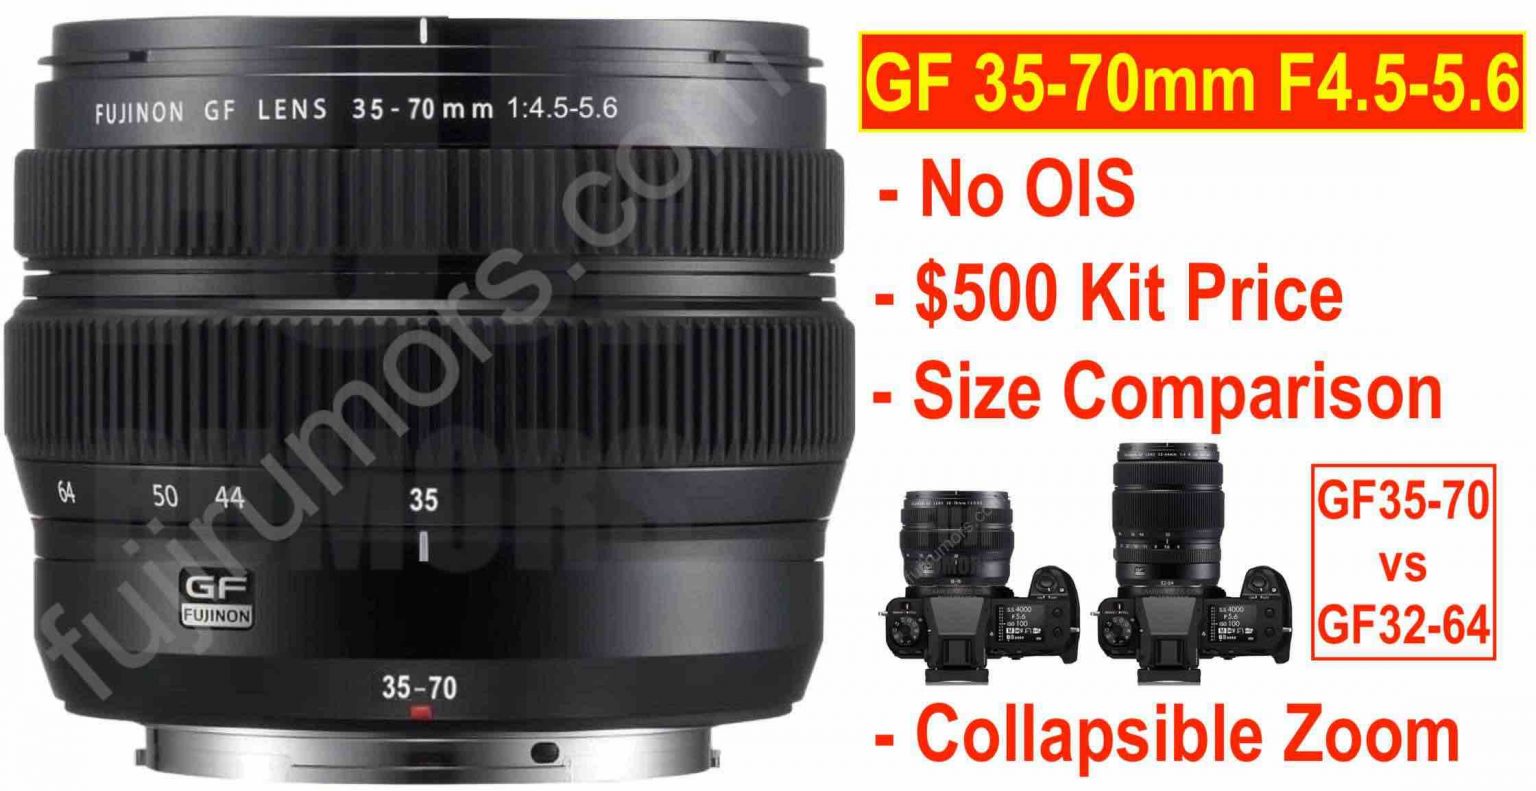 Fujinon GF 35-70mmF4.5-5.6 Coming Without Optical Image Stabilization